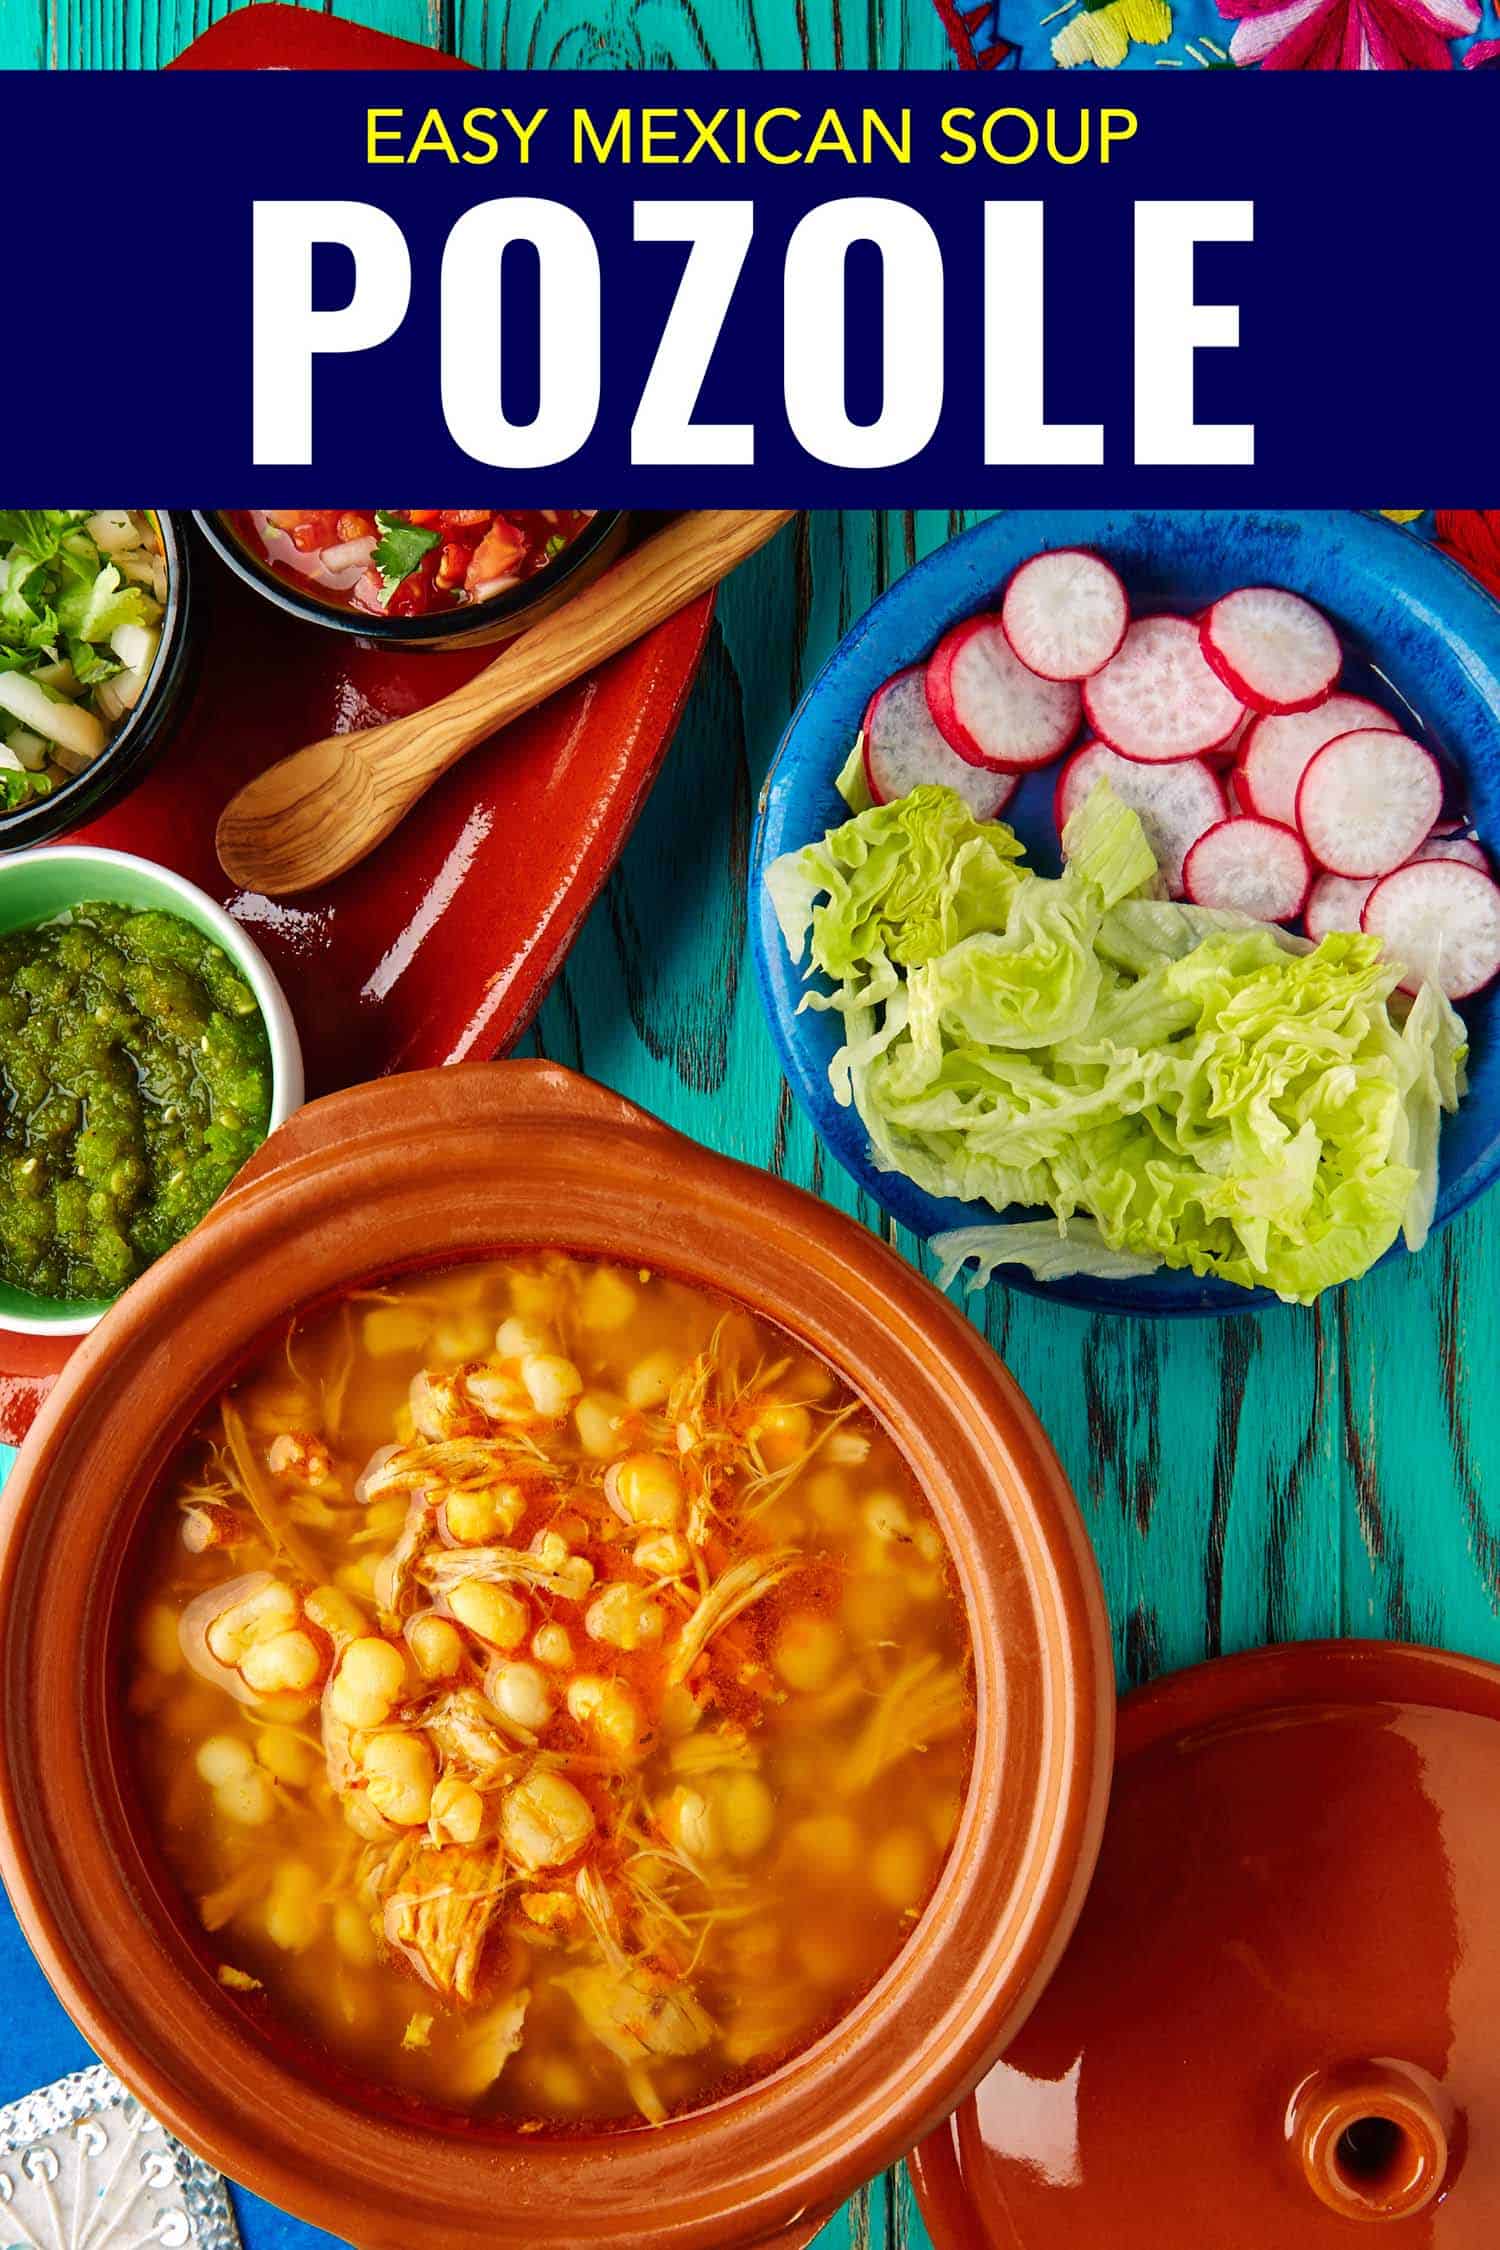 Mexican stew called pozole on a bright background with all of the garnishes like radish, lettuce and salsa